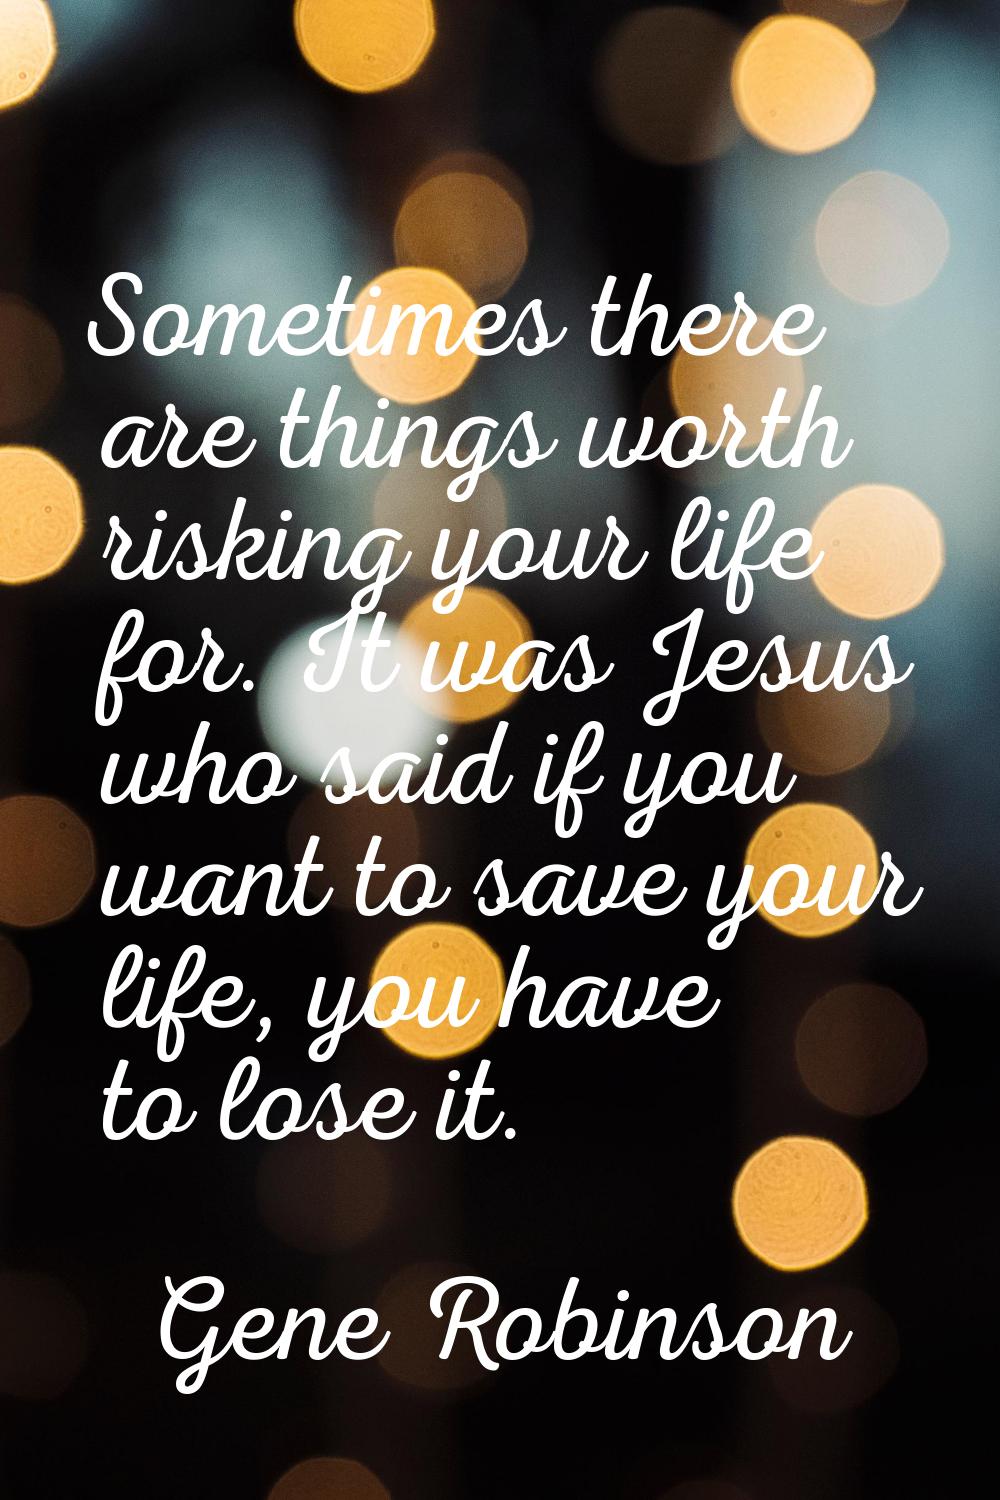 Sometimes there are things worth risking your life for. It was Jesus who said if you want to save y